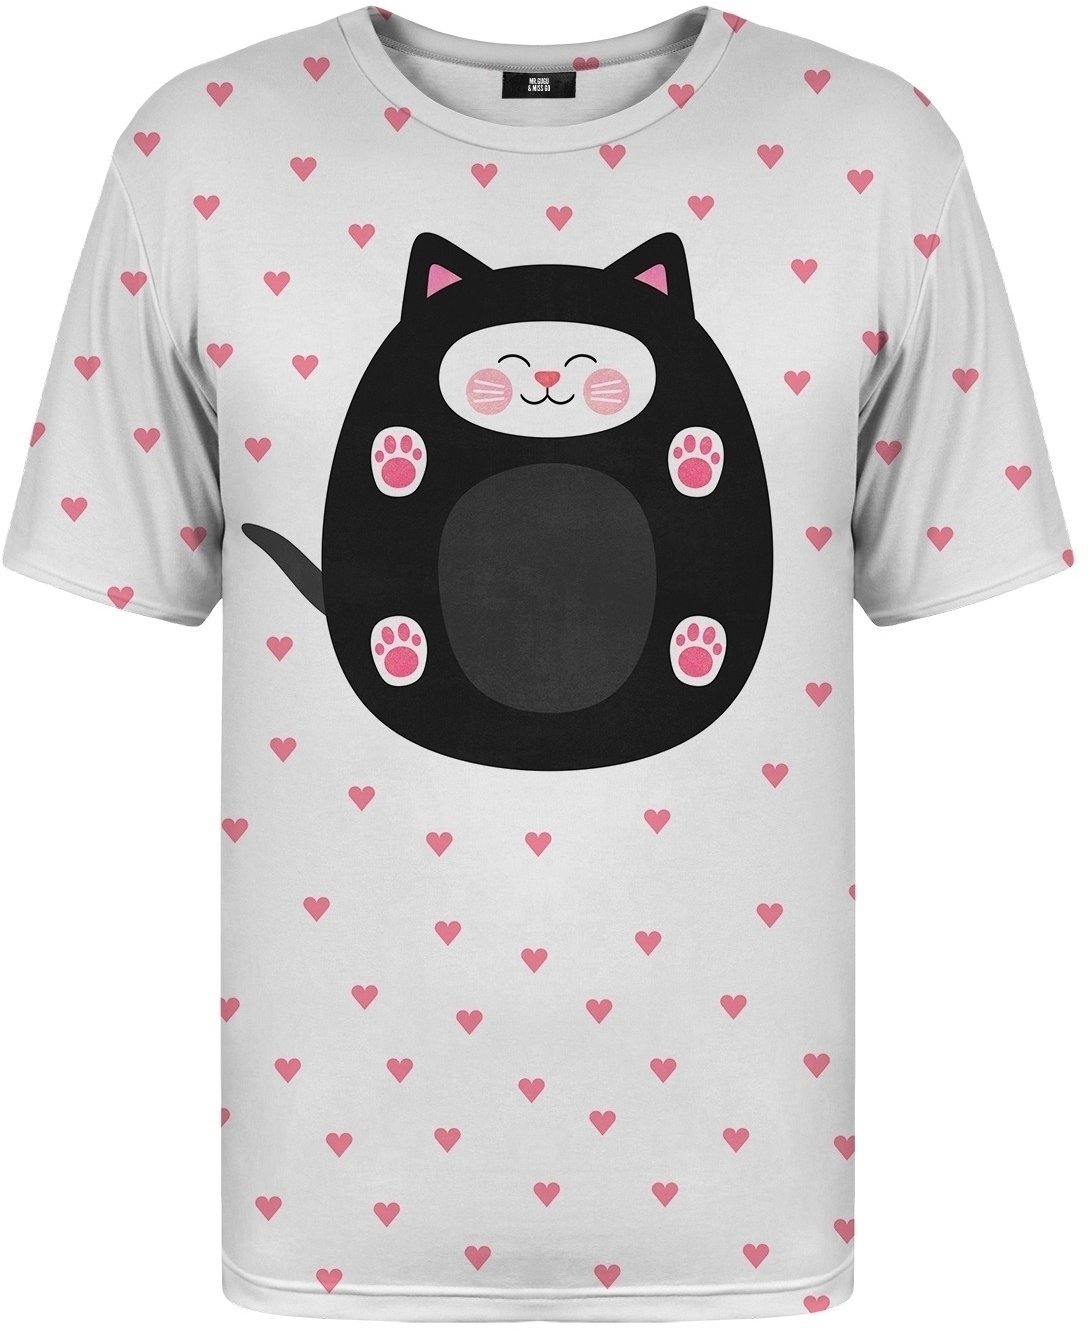 Shirt Mr. Gugu and Miss Go Soft Kitty T-Shirt S